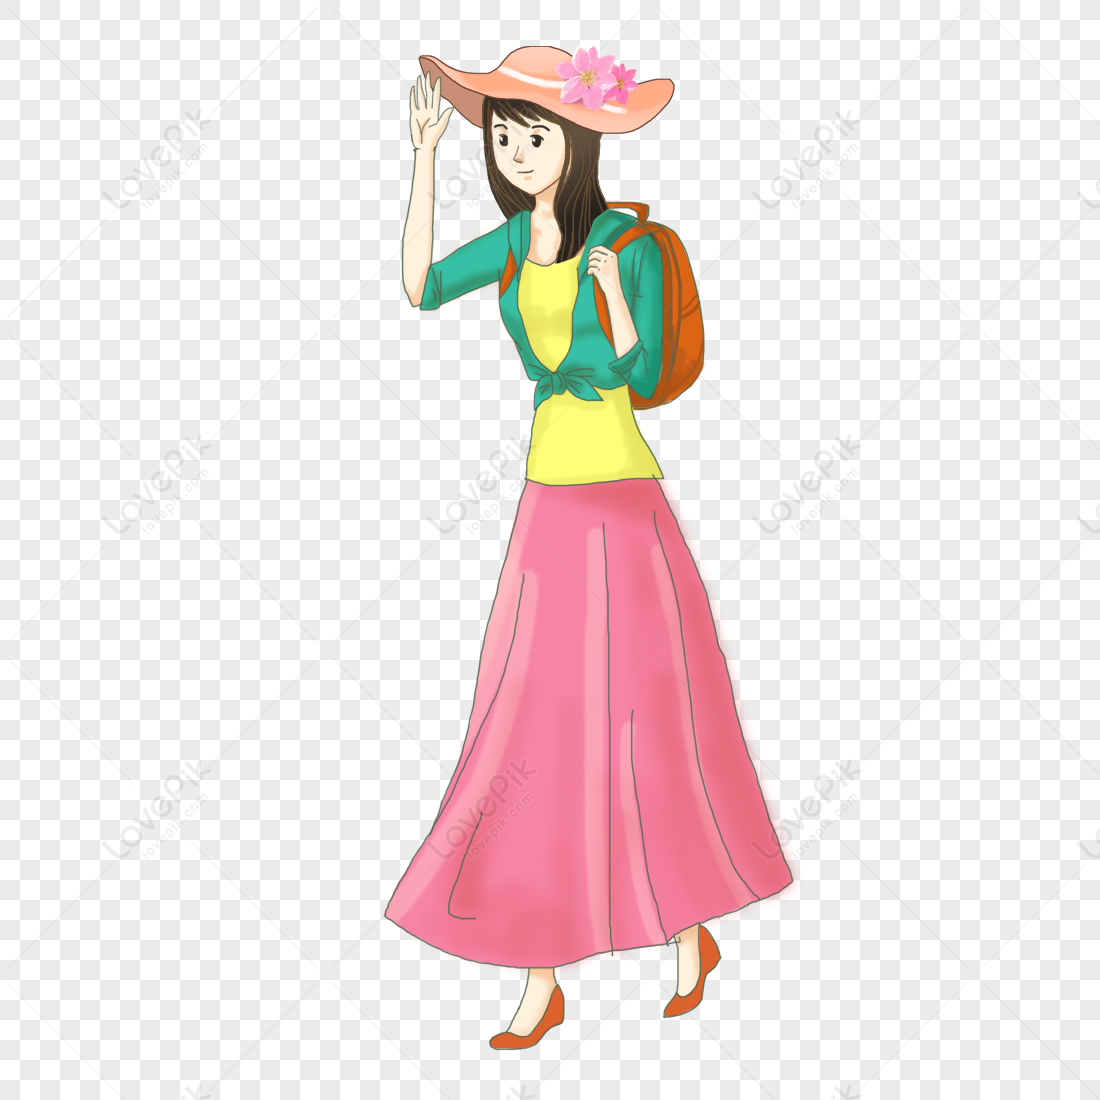 Youth Girl Character Image PNG Hd Transparent Image And Clipart Image ...